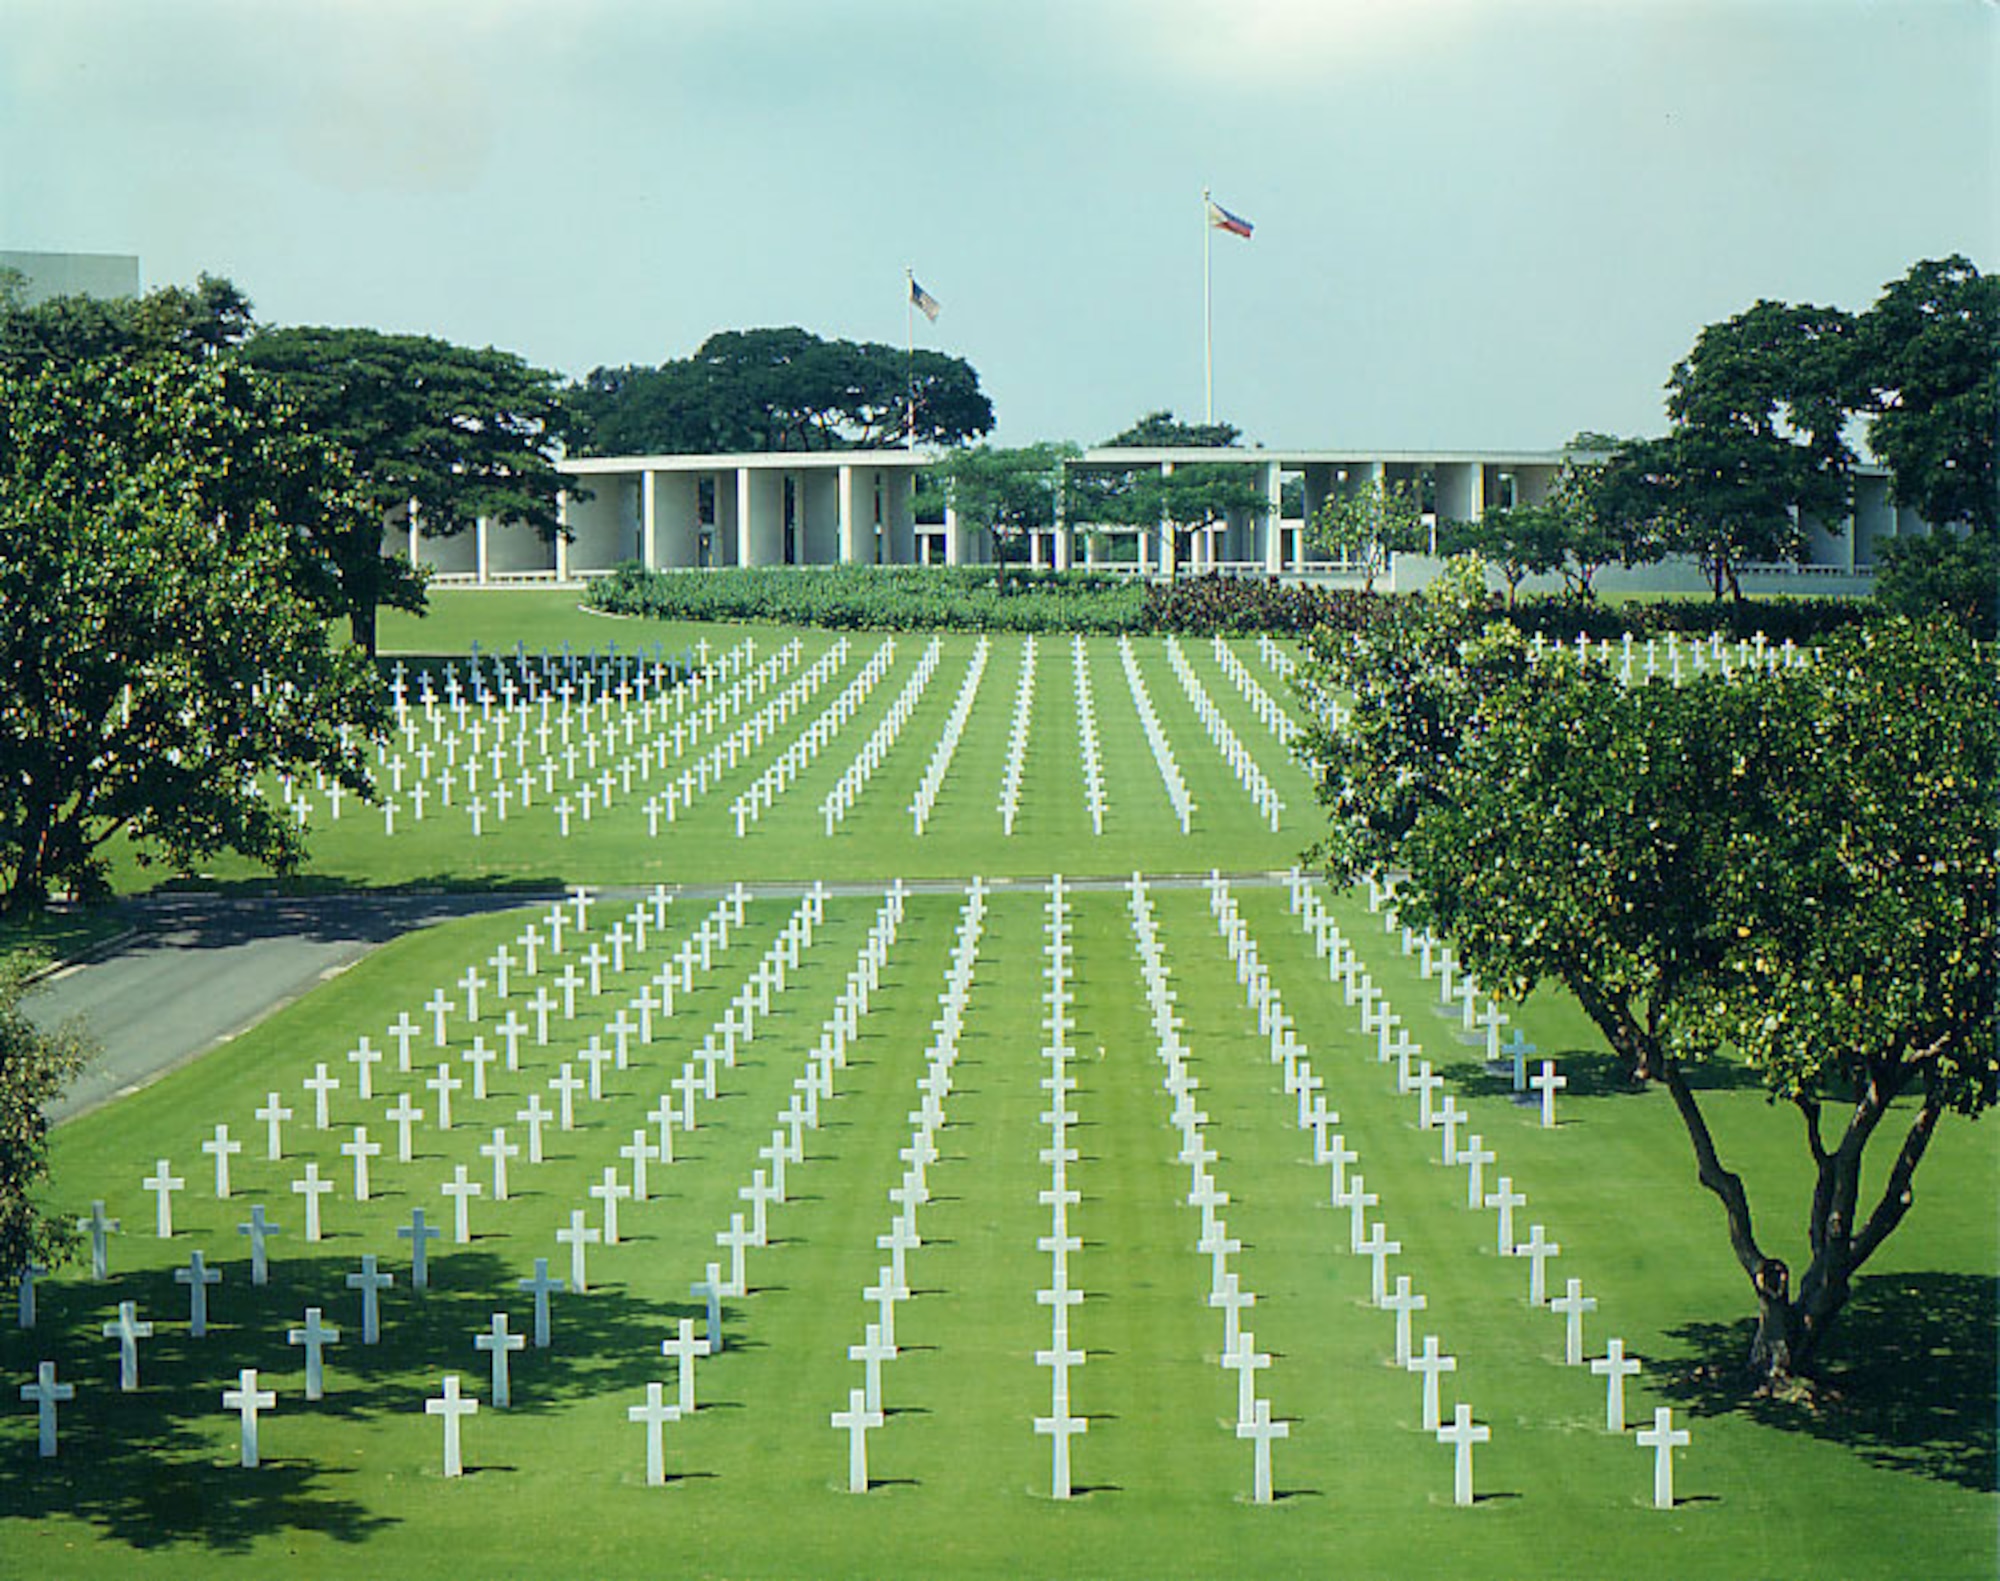 Manila American Cemetery and Memorial, Philippines. This cemetery of 152 acres is
maintained by the American Battle Monuments Commission and has more than 17,000 graves,
the largest number of graves of any cemetery for U.S. personnel killed during World War II.
(Wikipedia)